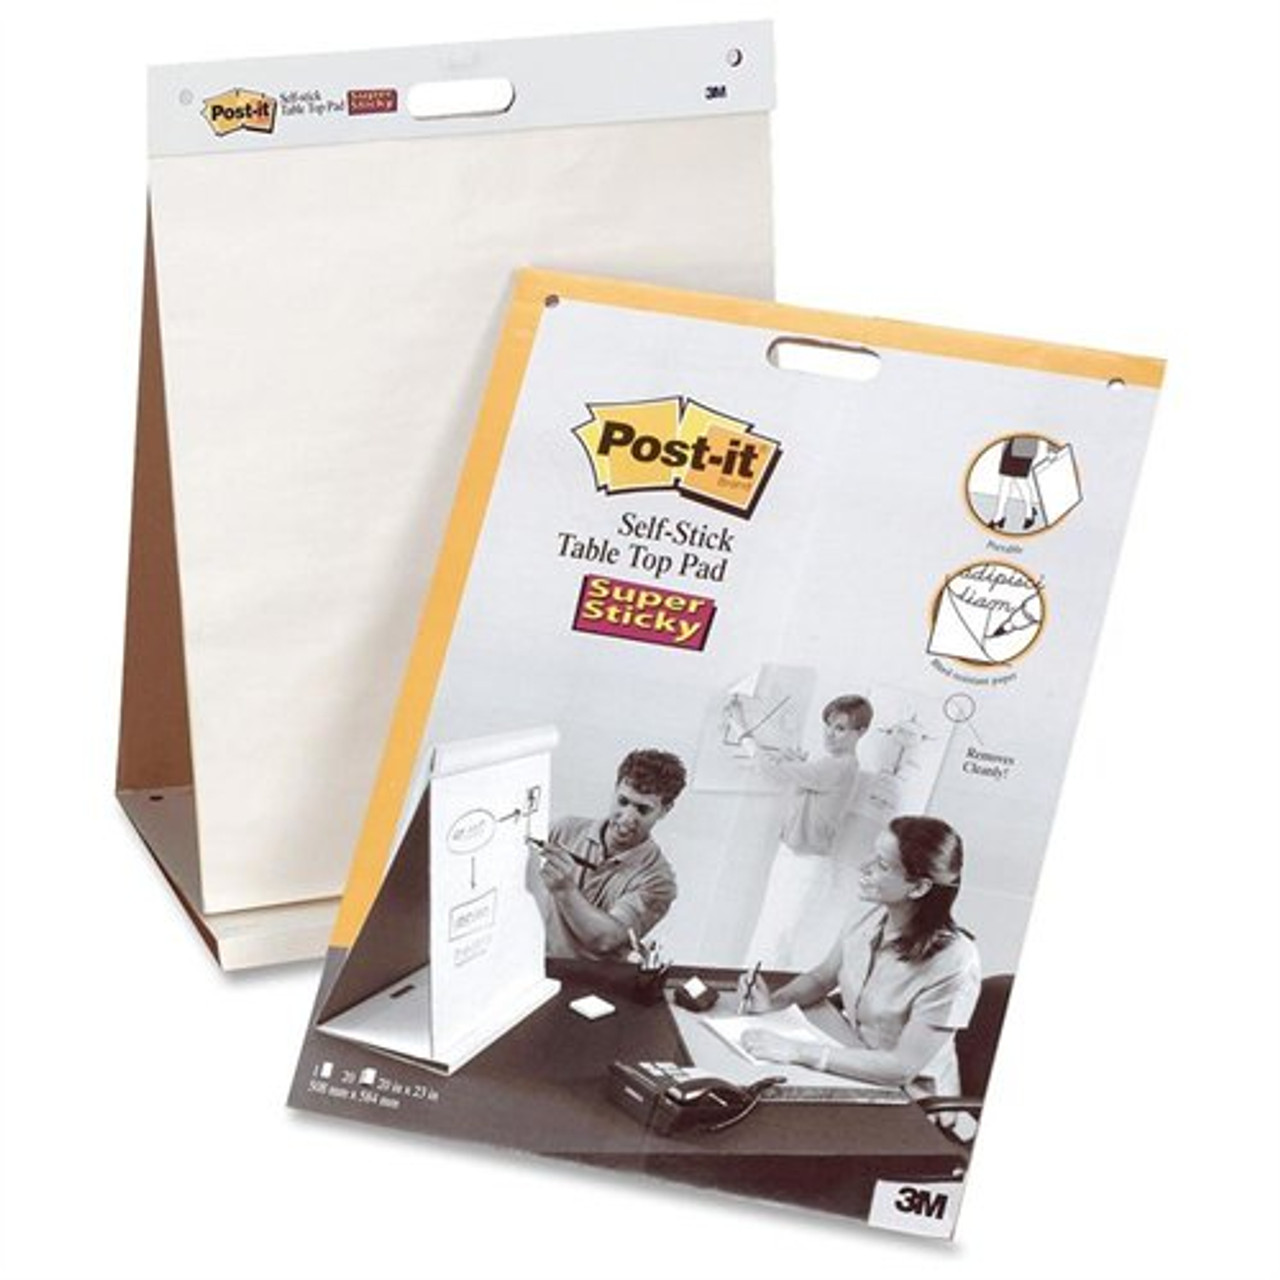 3M Post-It Dry Erase Tabletop Unruled Easel Pad, 20 x 23, 20 Sheets, White